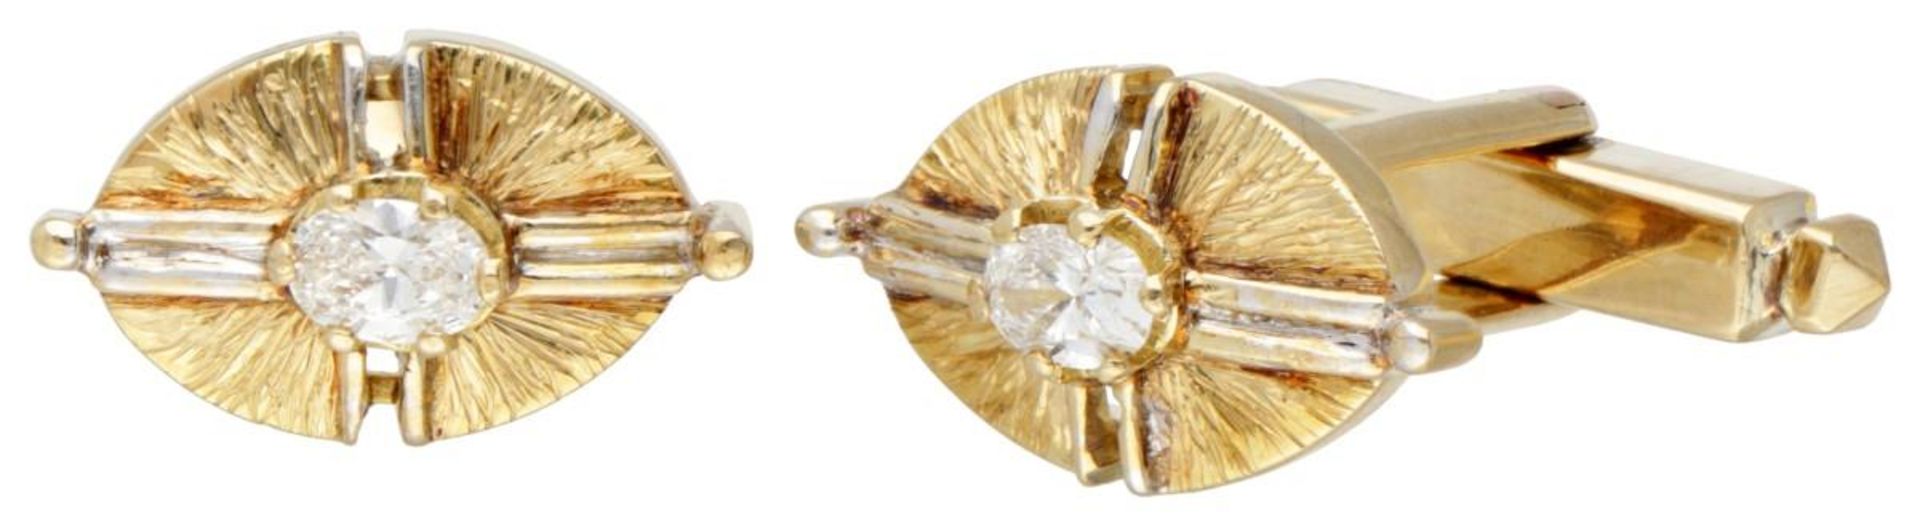 14K. Bicolor gold cufflinks set with approx. 0.65 ct. diamond. - Image 2 of 6